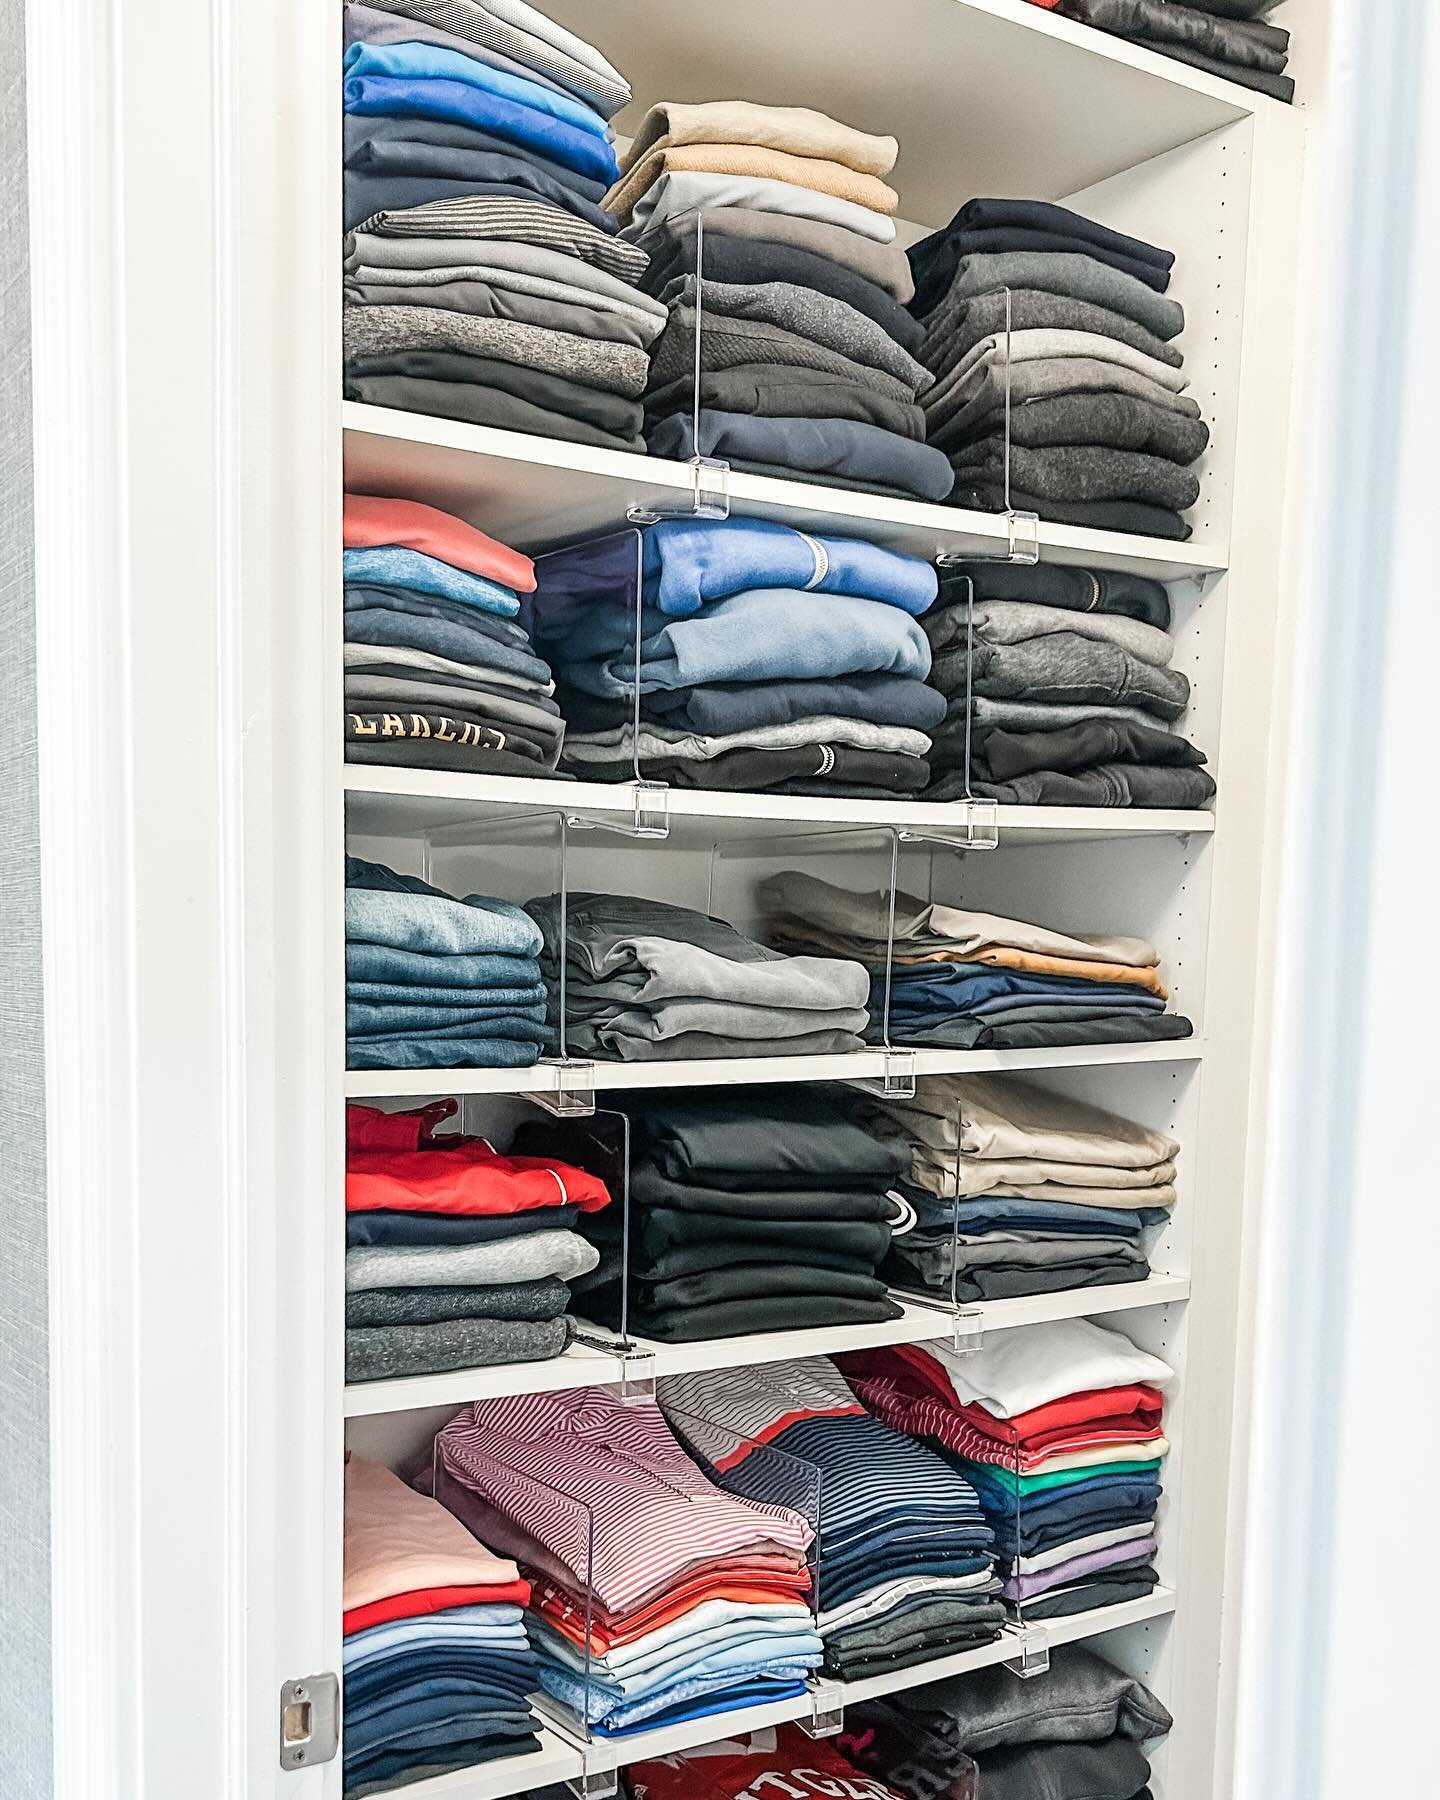 It&rsquo;s almost #fathersday and for this dad the #gift of a partially rebuilt and organized closet was the perfect one! Check out the before and after pics- we expanded the #shoe storage and incorporated #products to maintain the new system. The en